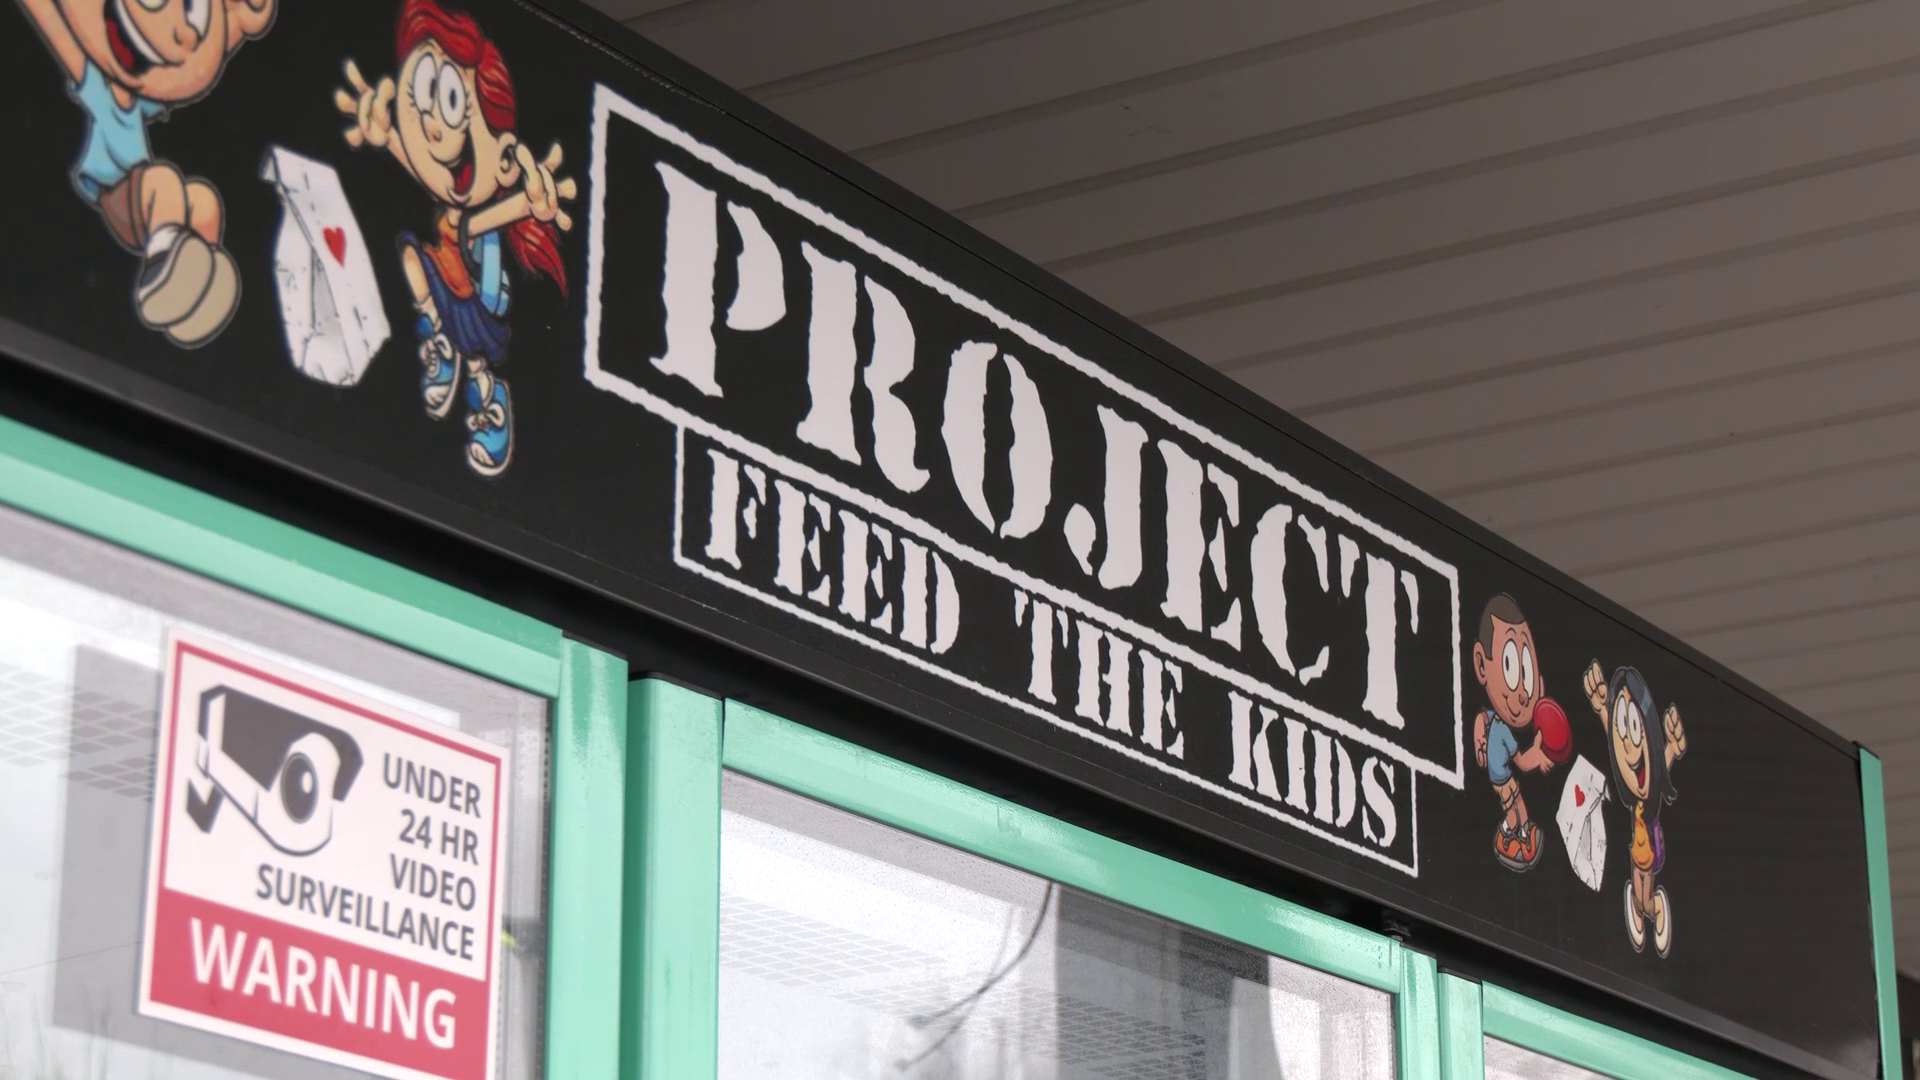 Project Feed the Kids seeks donations to install cameras at meal coolers